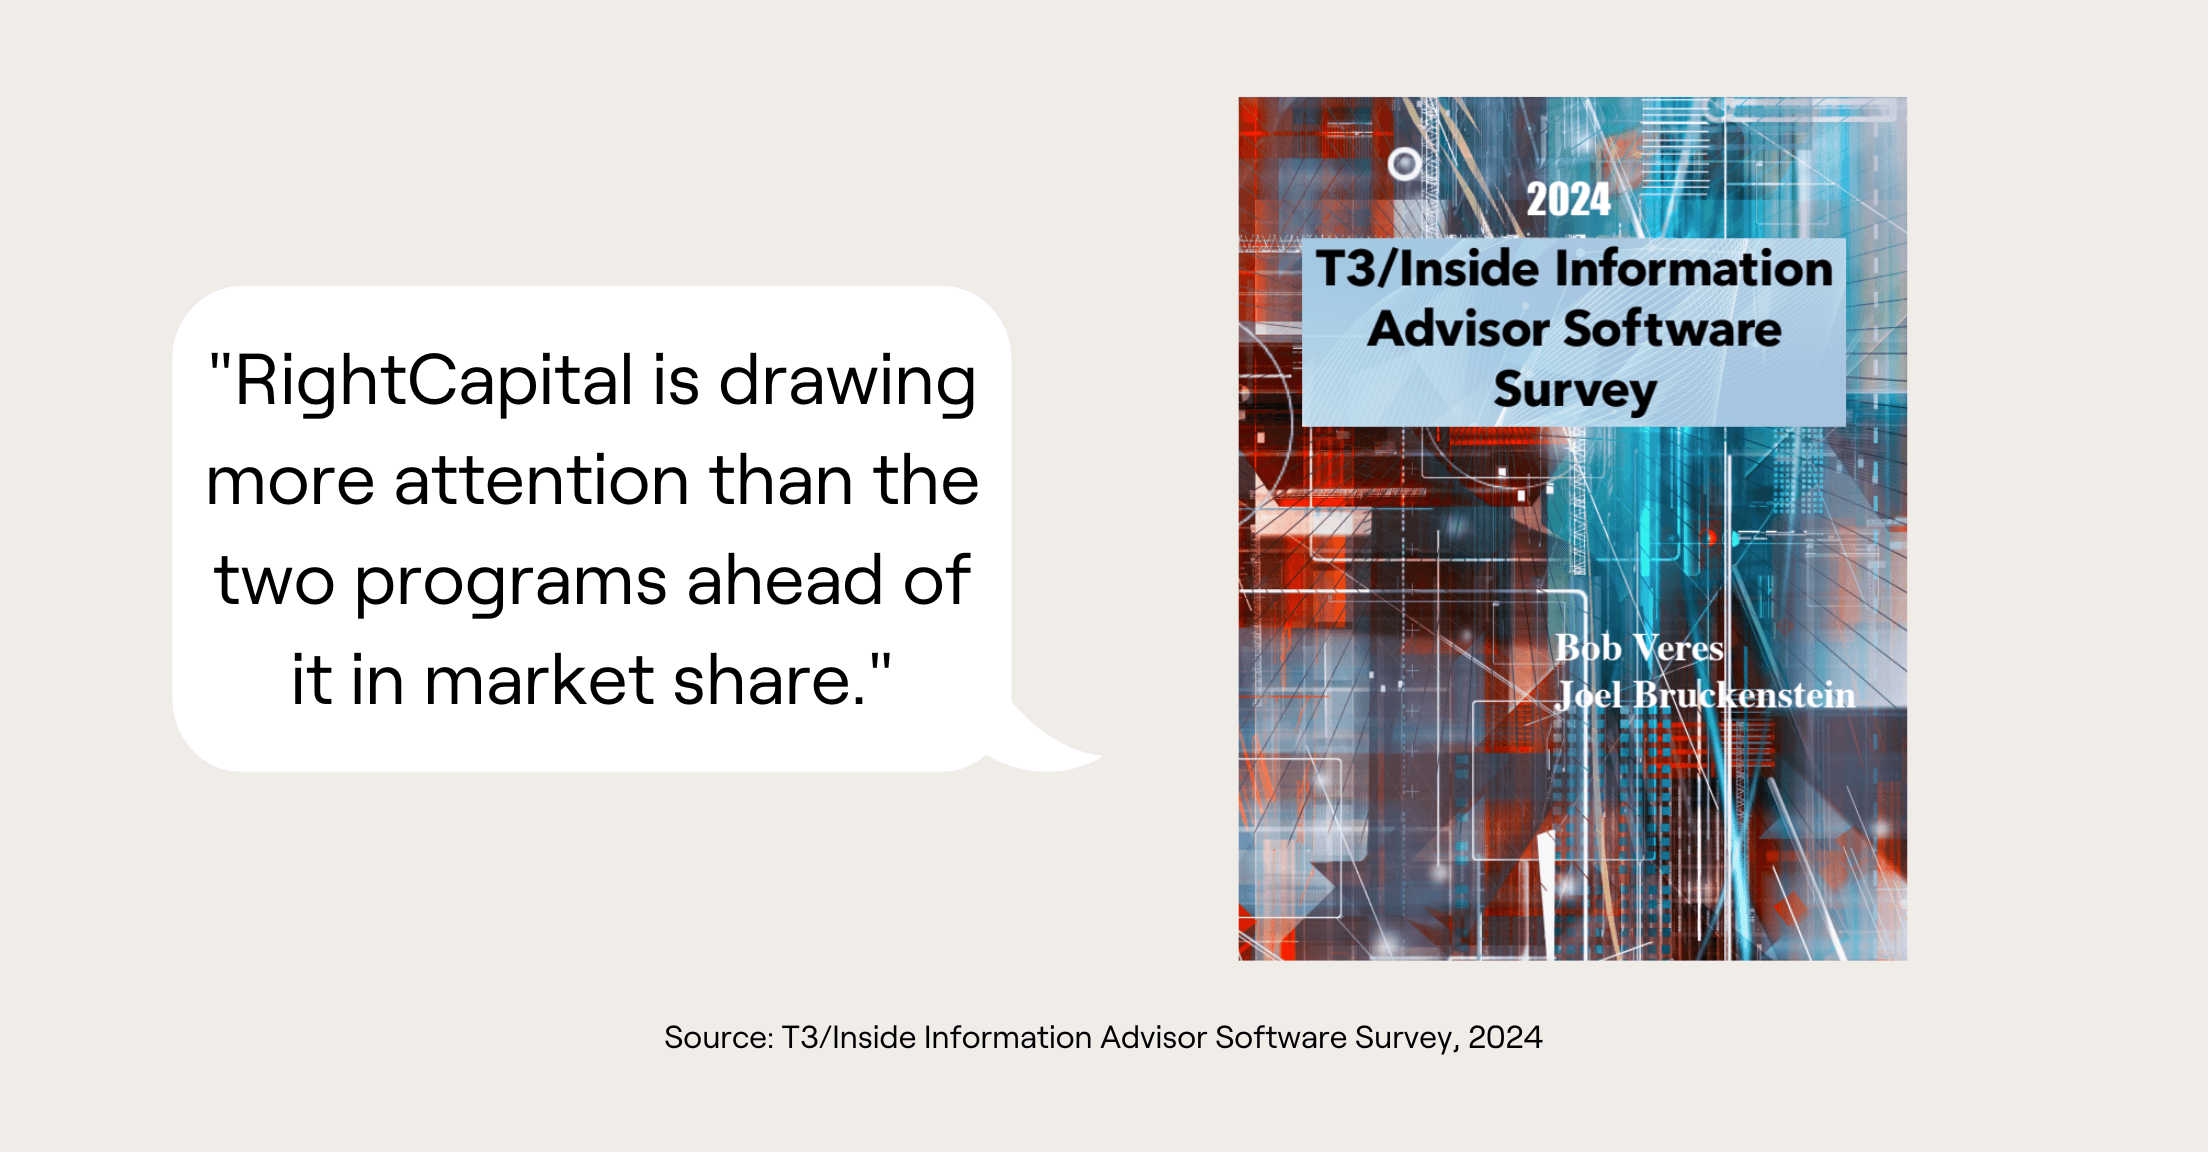 Quote from 2024 T3/Inside Information Advisor Software Survey, "RightCapital is drawing more attention than the two programs ahead of it in market share."